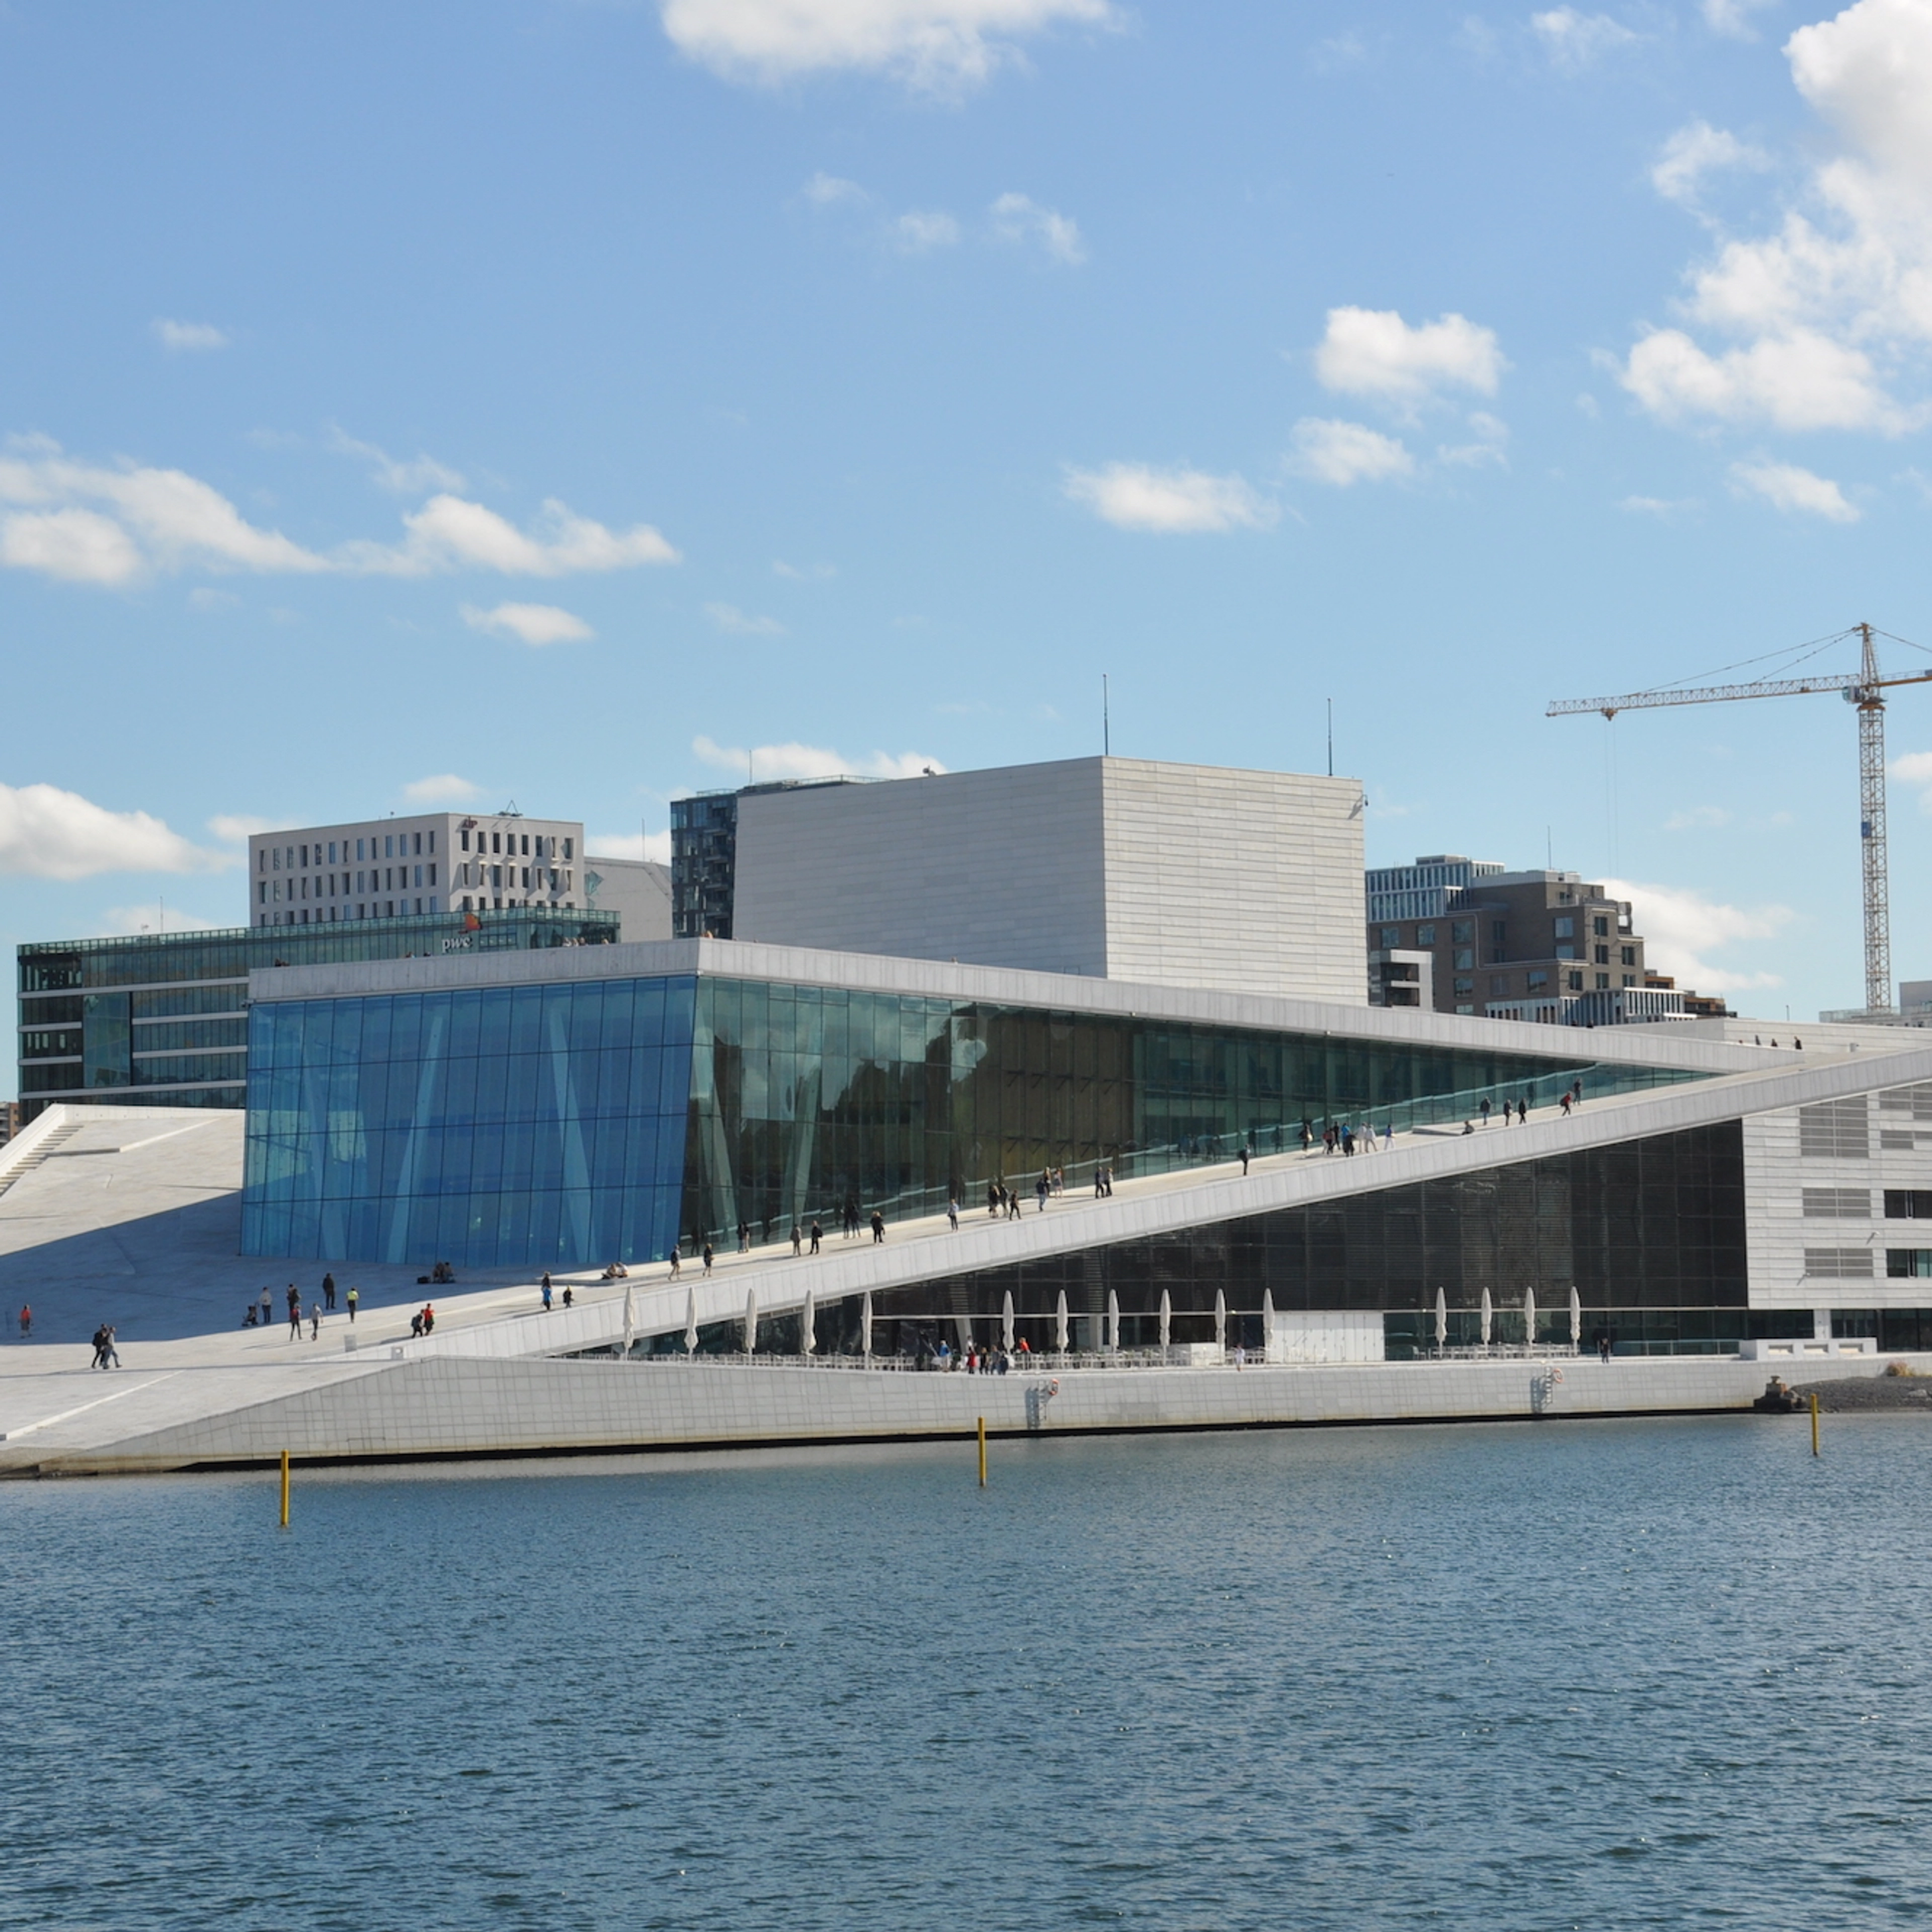 Activities in Oslo - Oslo Discovery bus tour - the opera house in Oslo, Norway